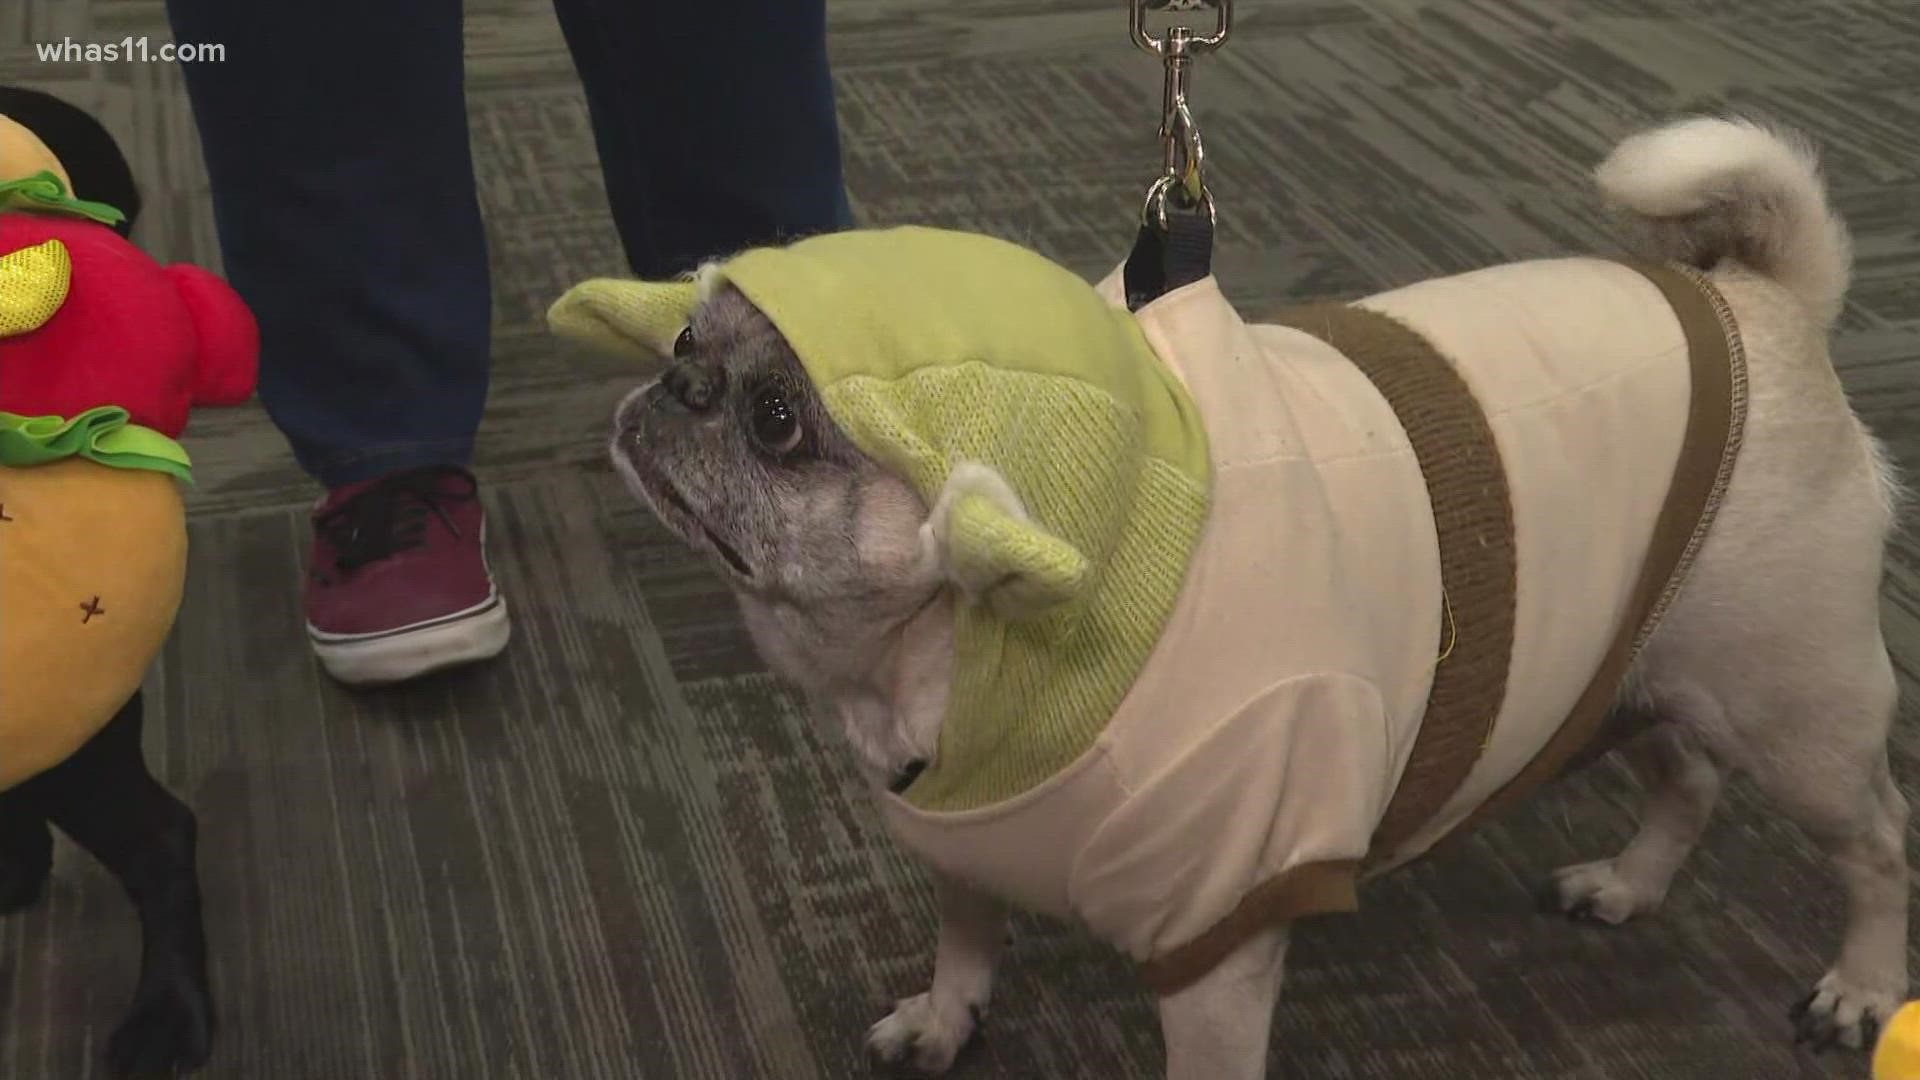 What's cuter than a weekend full of pugs and fun costumes? Come see Puggy Yoda and more fun dressed up characters this weekend, May 14-15, at the Bluegrass PugFest.